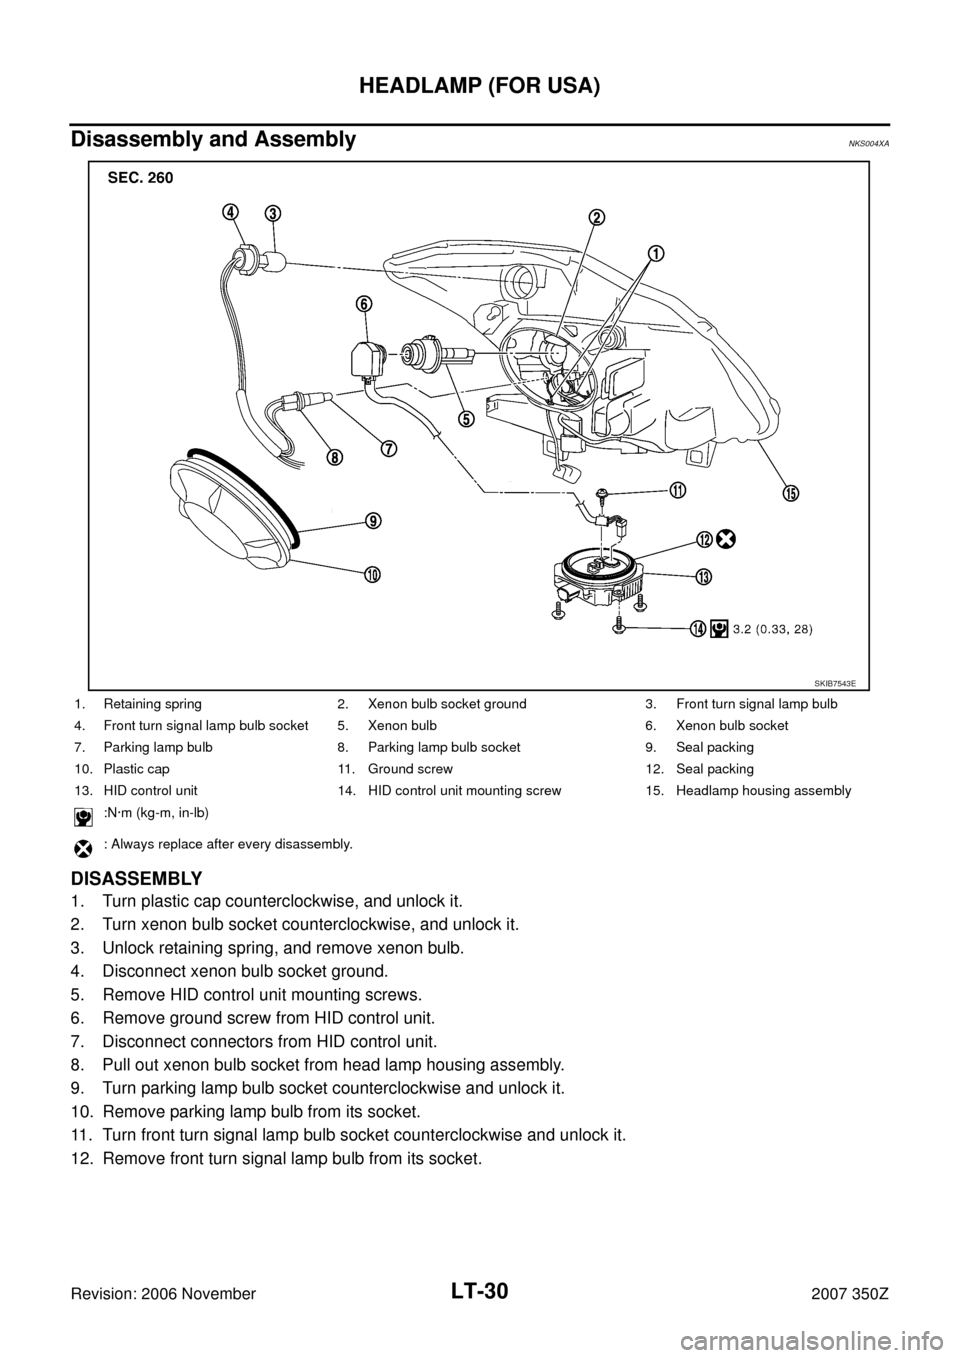 NISSAN 350Z 2007 Z33 Lighting System Workshop Manual LT-30
HEADLAMP (FOR USA)
Revision: 2006 November2007 350Z
Disassembly and Assembly NKS004XA
DISASSEMBLY
1. Turn plastic cap counterclockwise, and unlock it.
2. Turn xenon bulb socket counterclockwise,